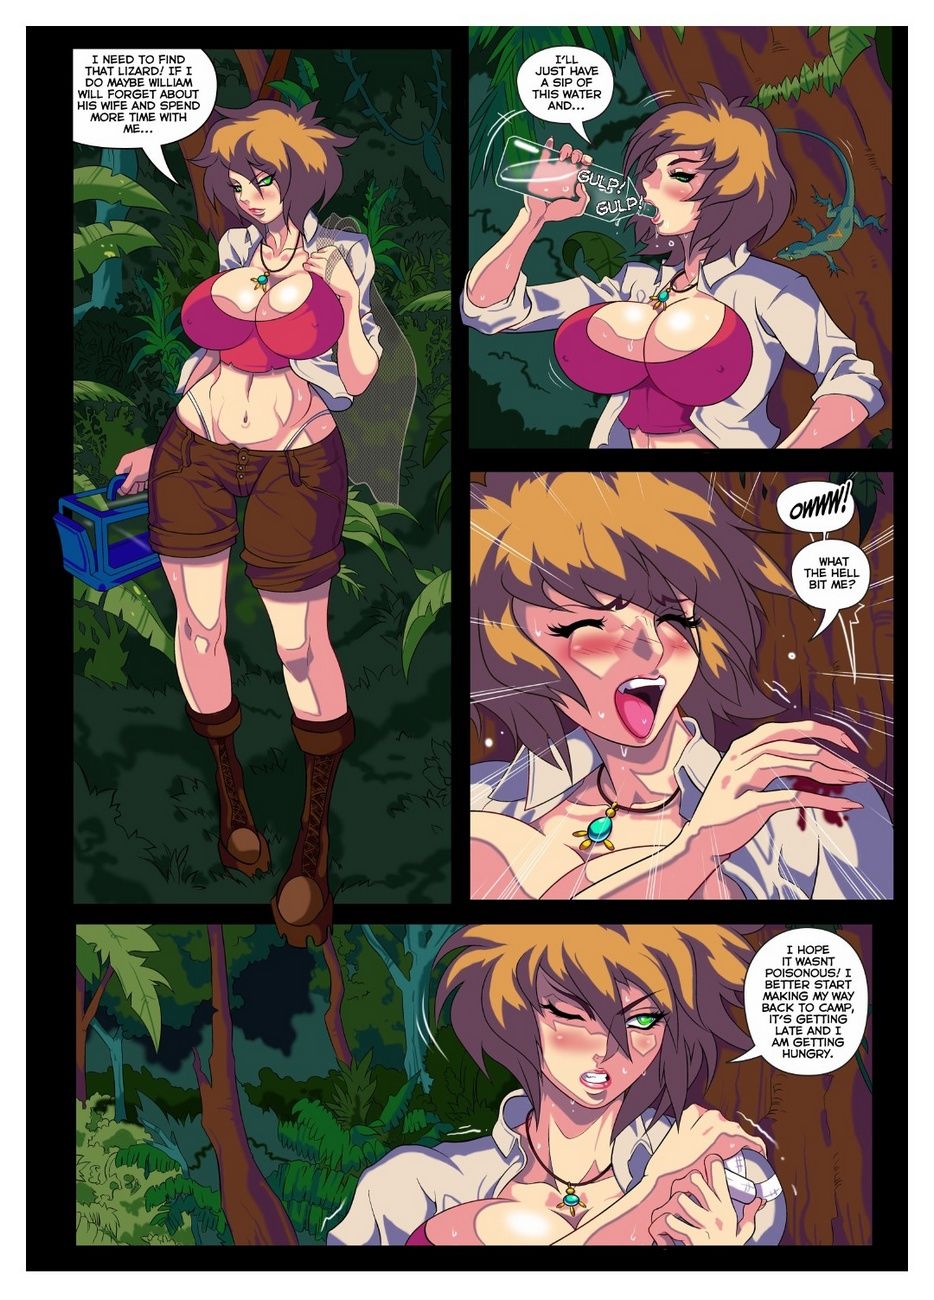 Edge Of Humanity 1 page 3